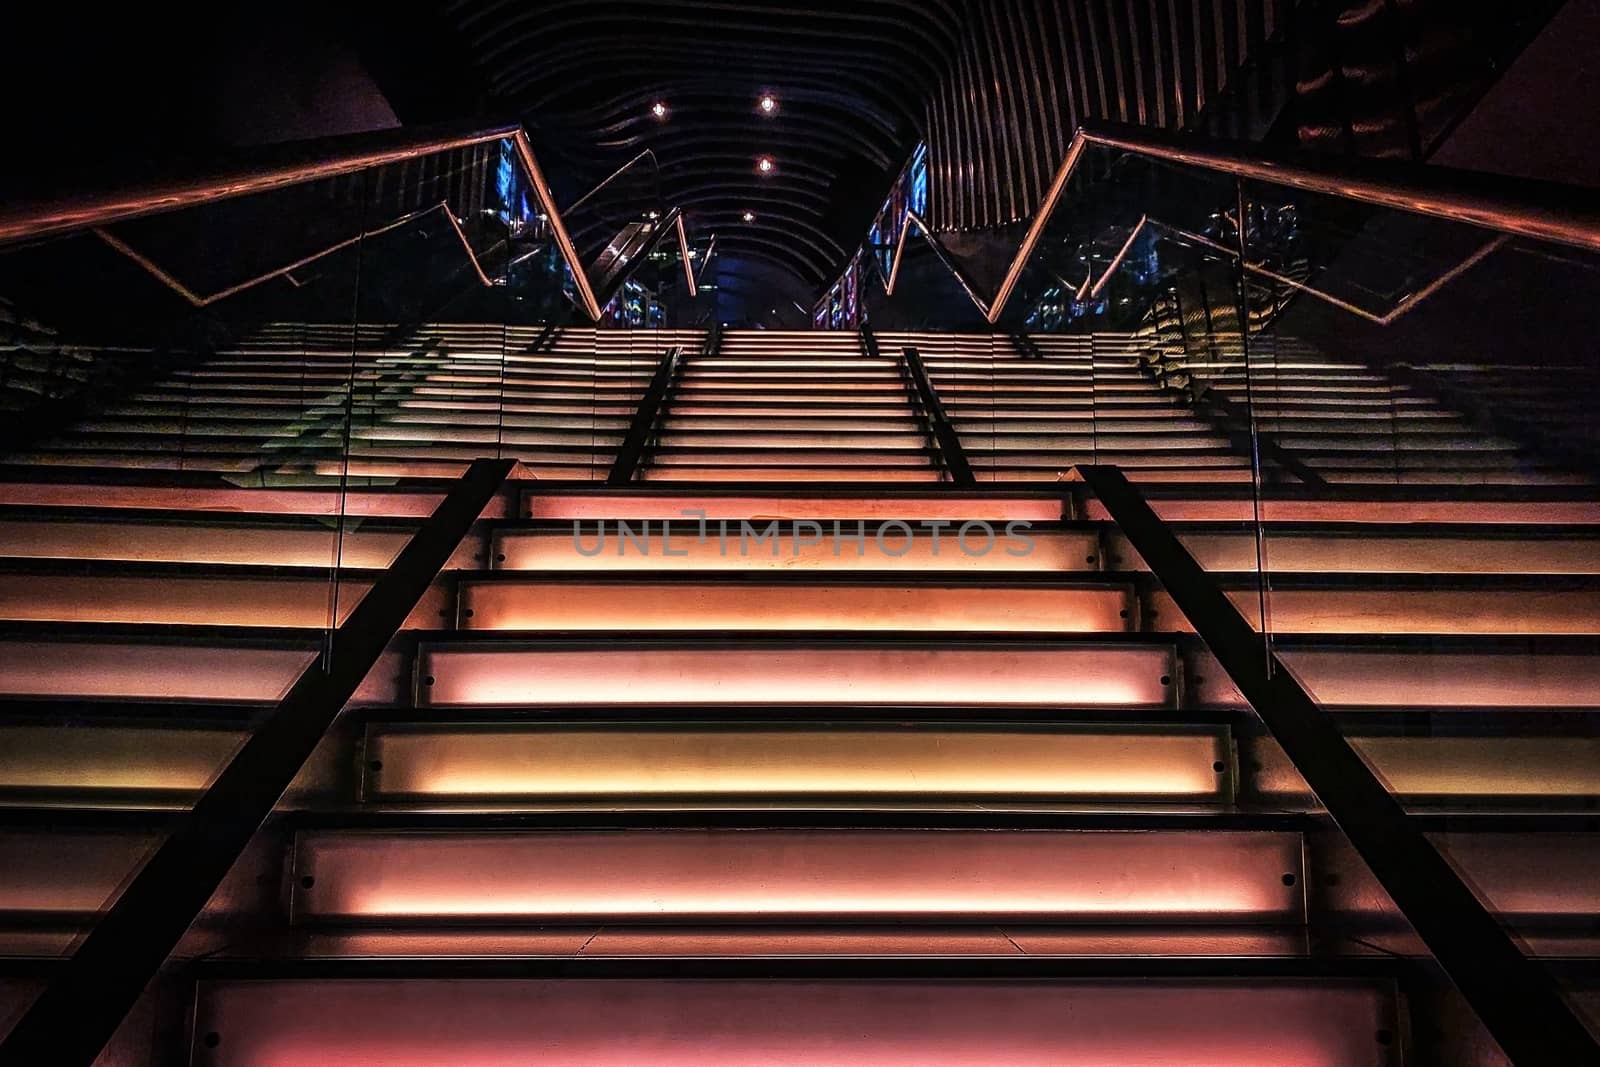 The inteior design of cinema light staircase with glass fence